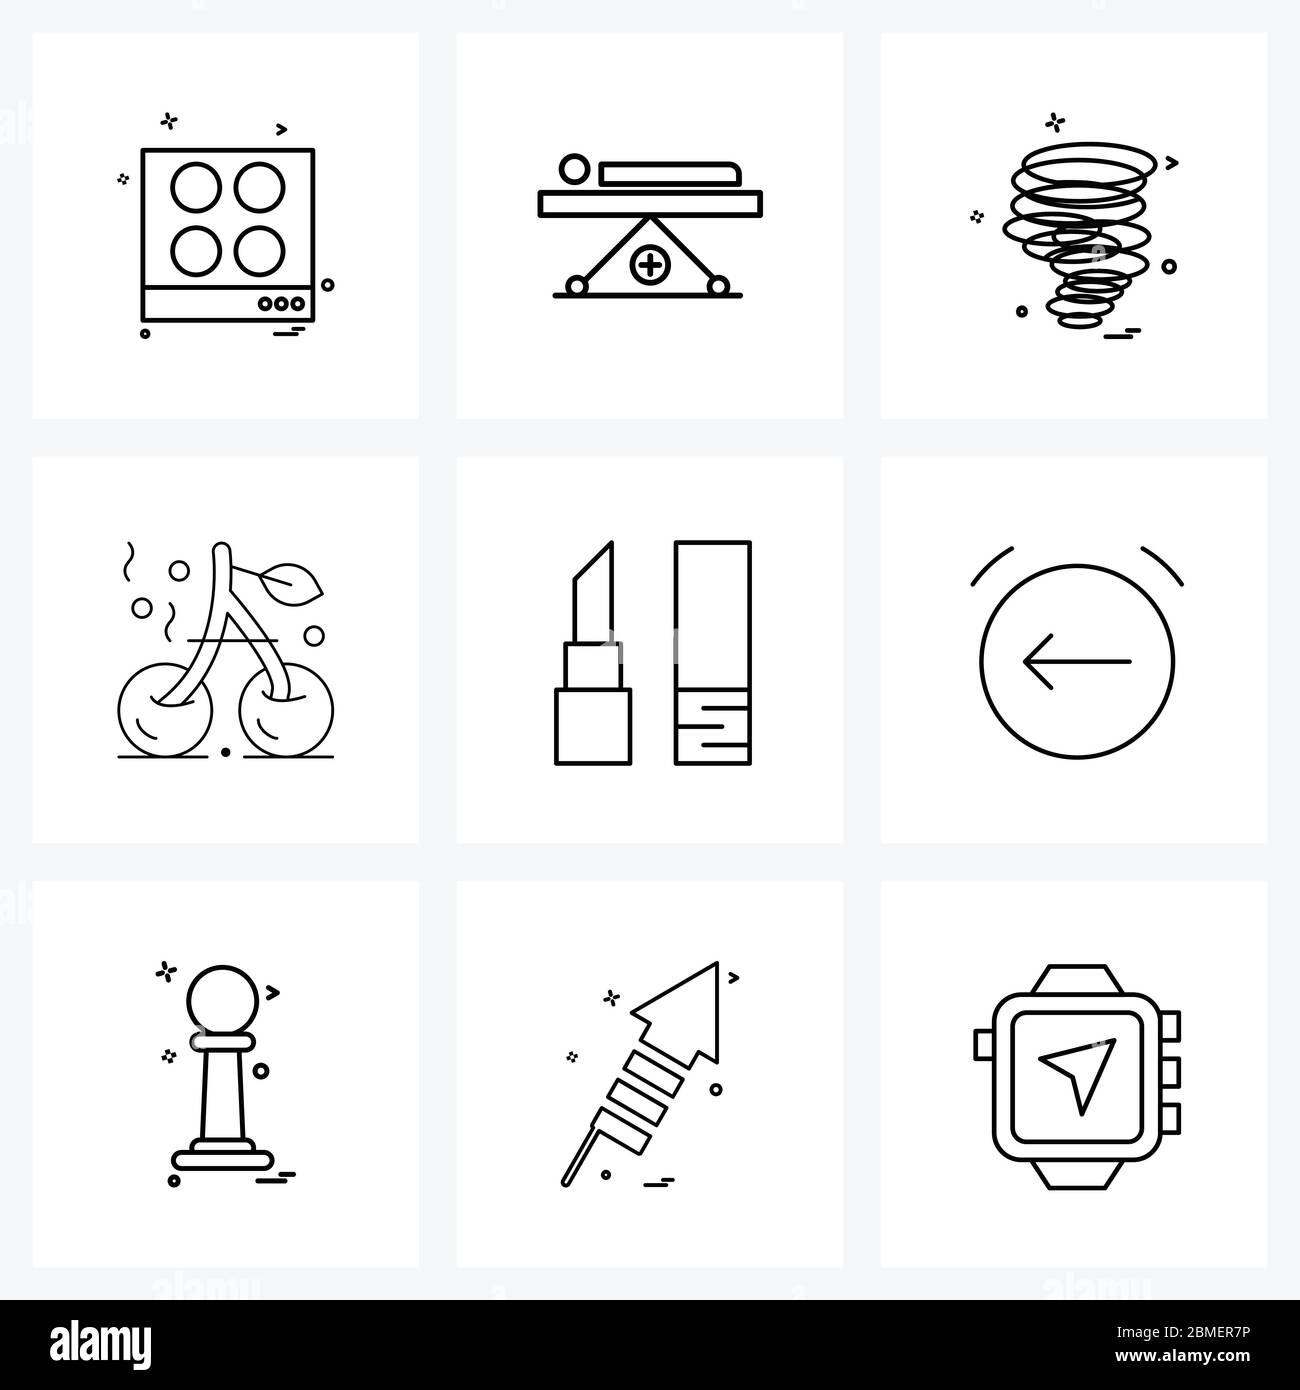 Mobile UI Line Icon Set of 9 Modern Pictograms of clock, lipstick, twister, lady, fruit Vector Illustration Stock Vector